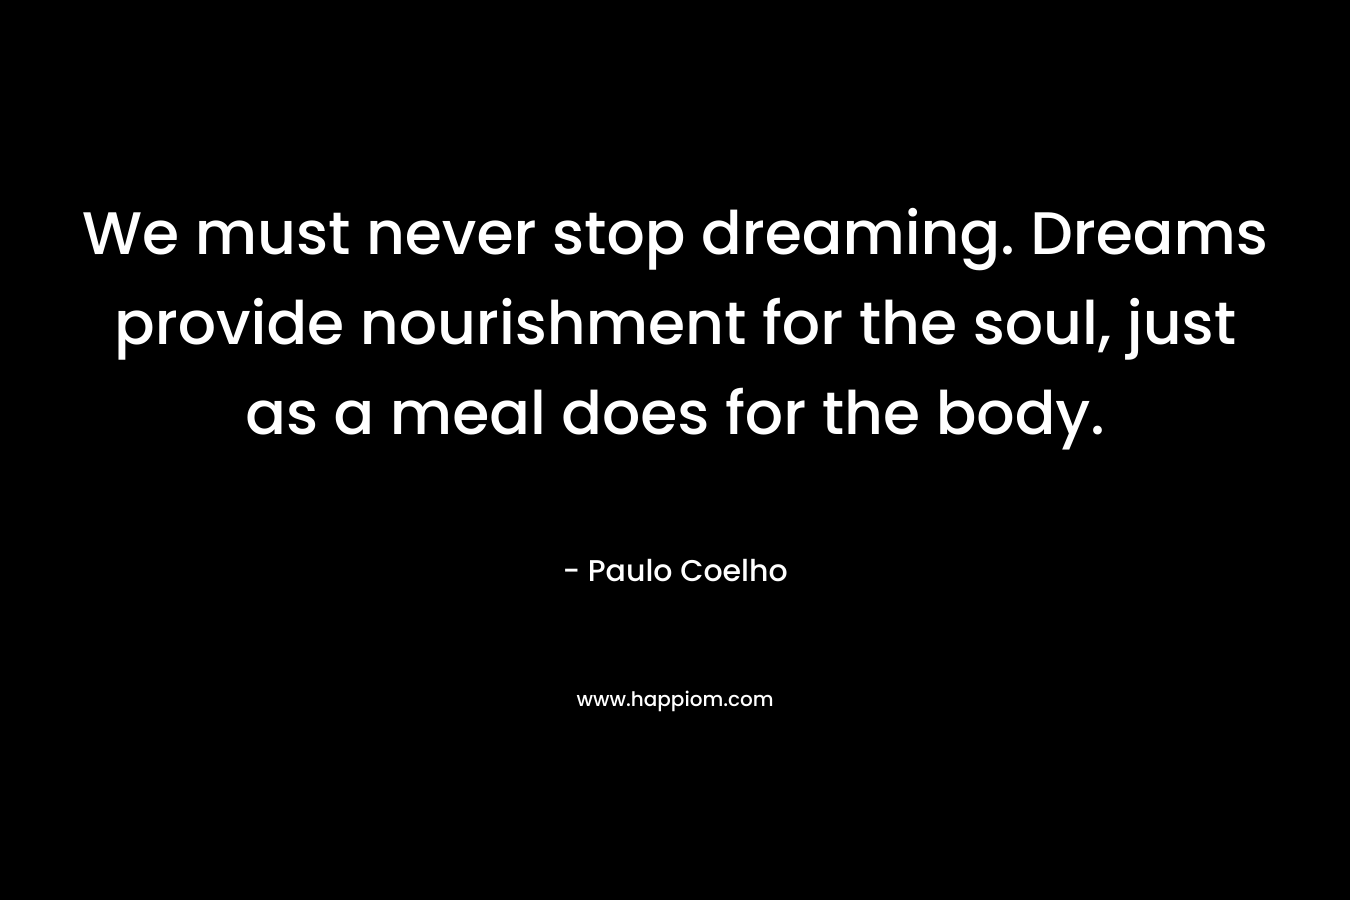 We must never stop dreaming. Dreams provide nourishment for the soul, just as a meal does for the body.